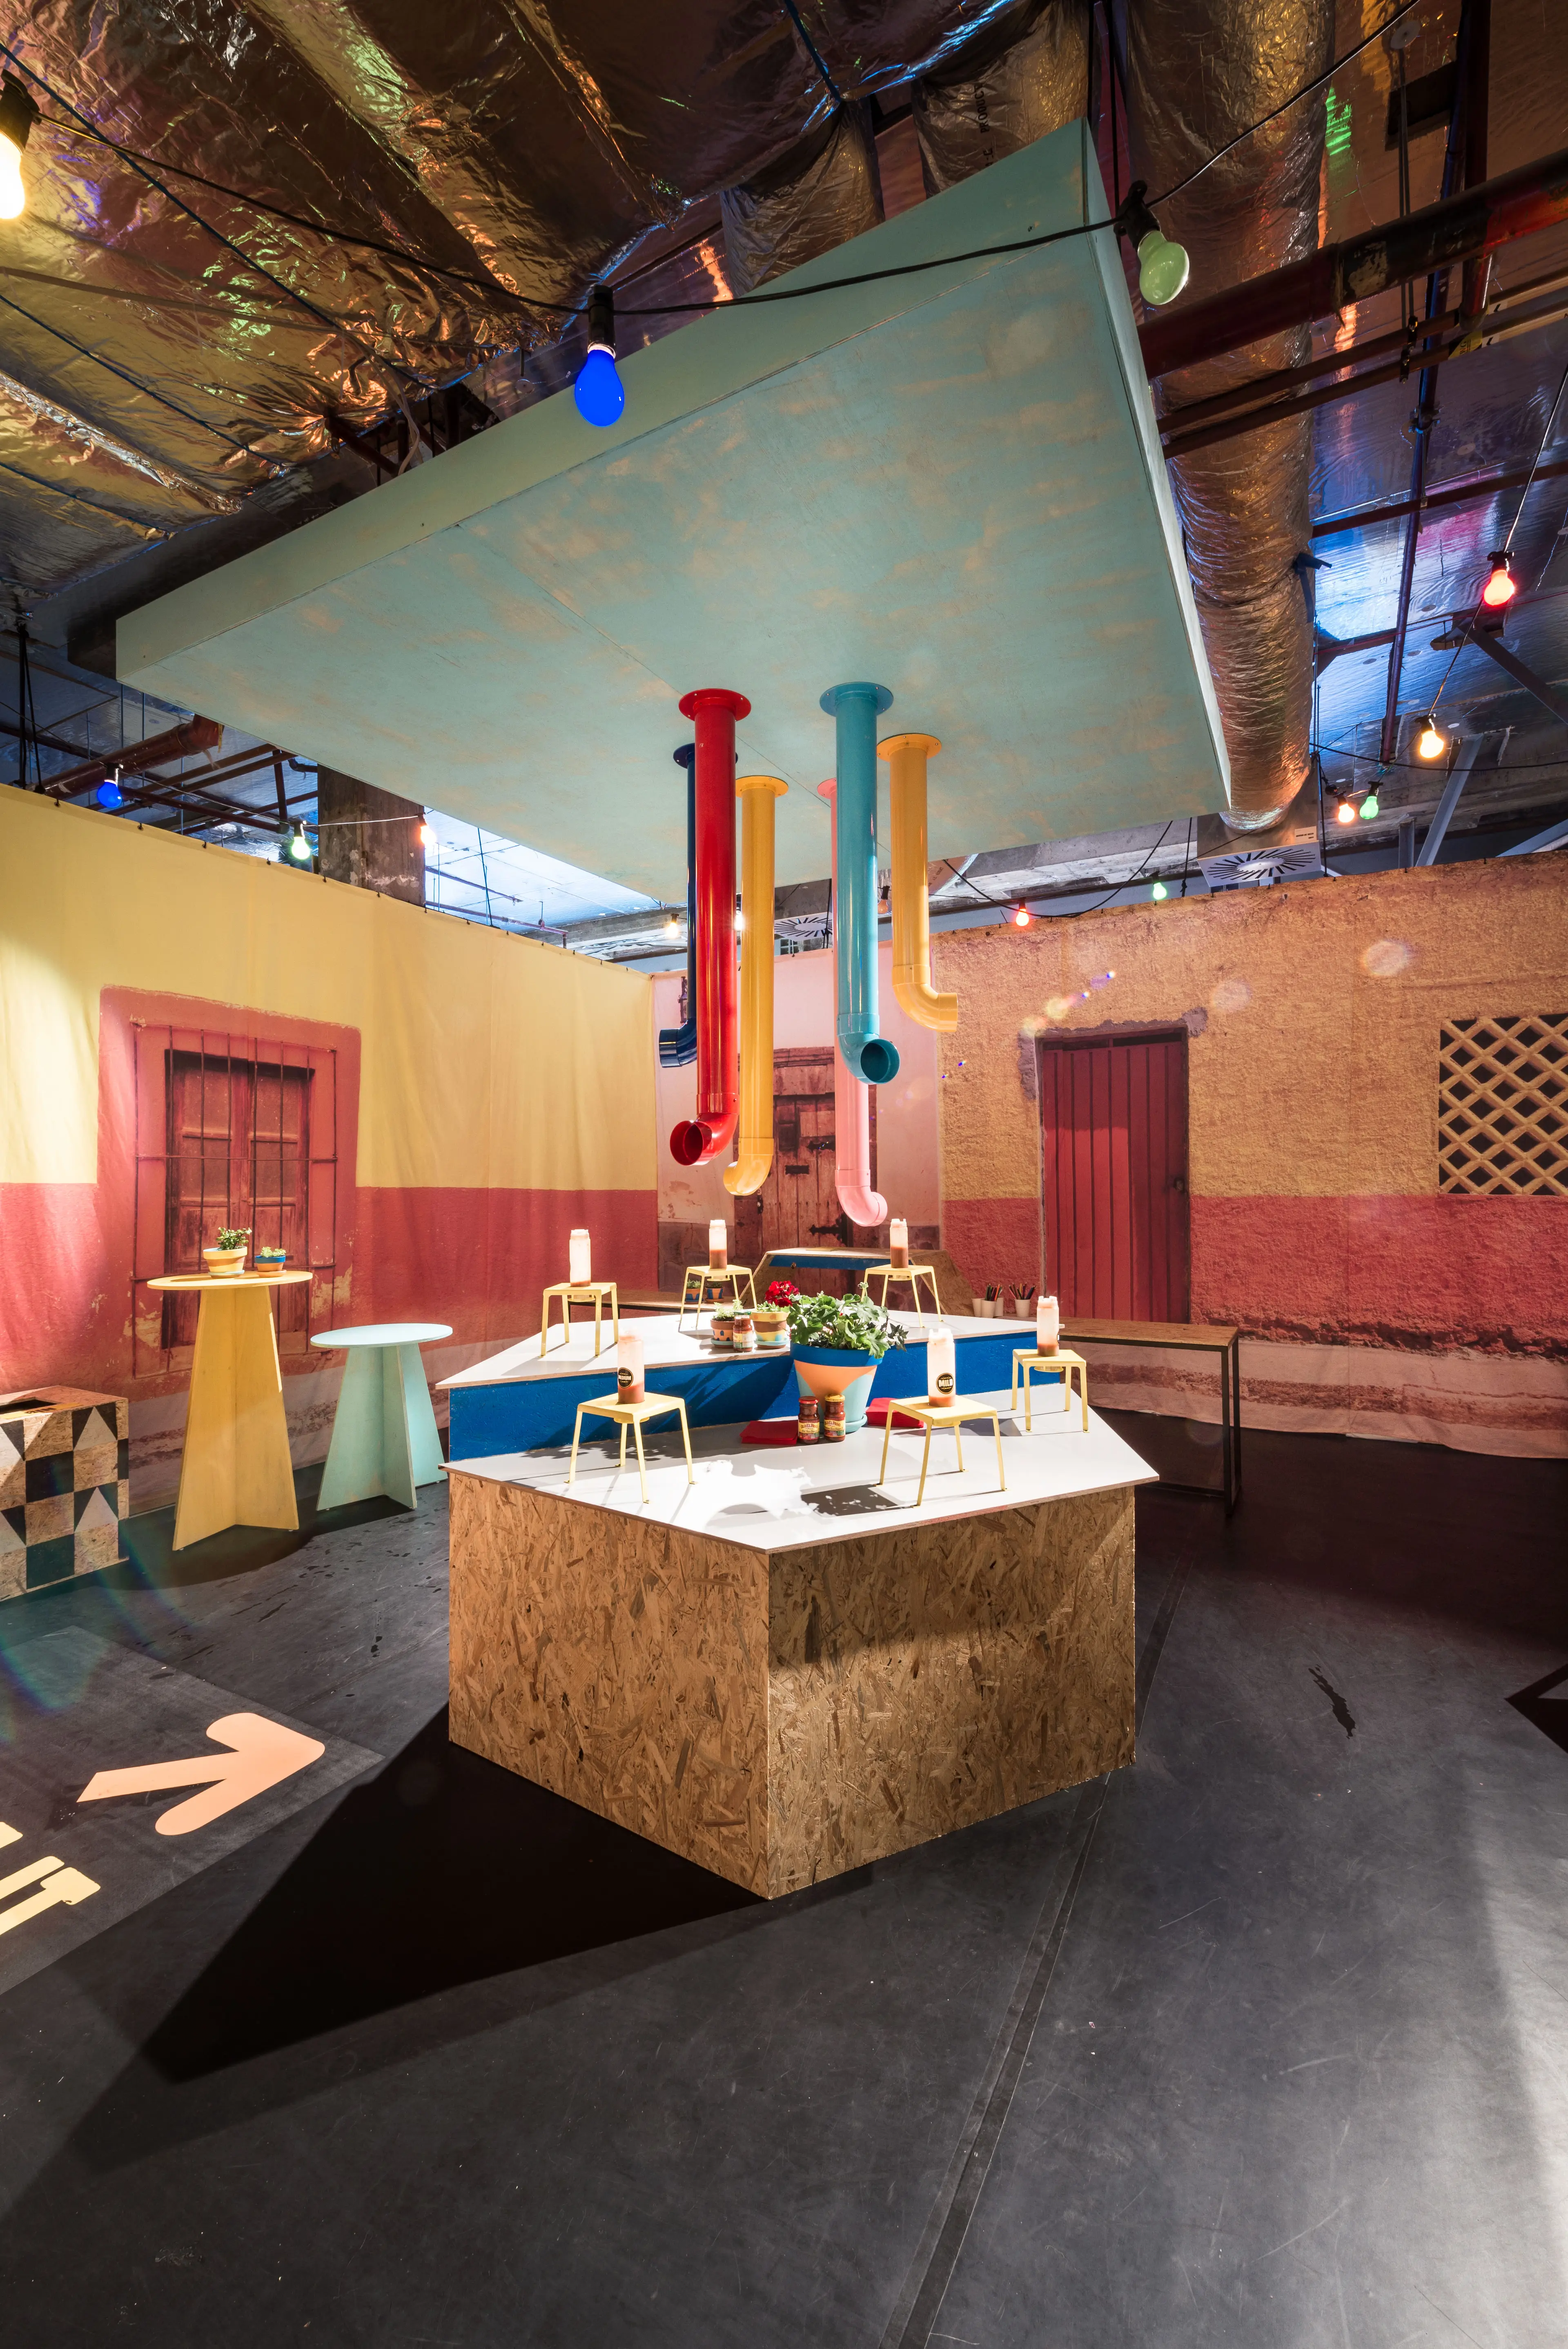 Old El Paso Pop Up Tortilla Bar - brand activation, hospitality interior design, fabrication and fitout - QV, Melbourne, Australia